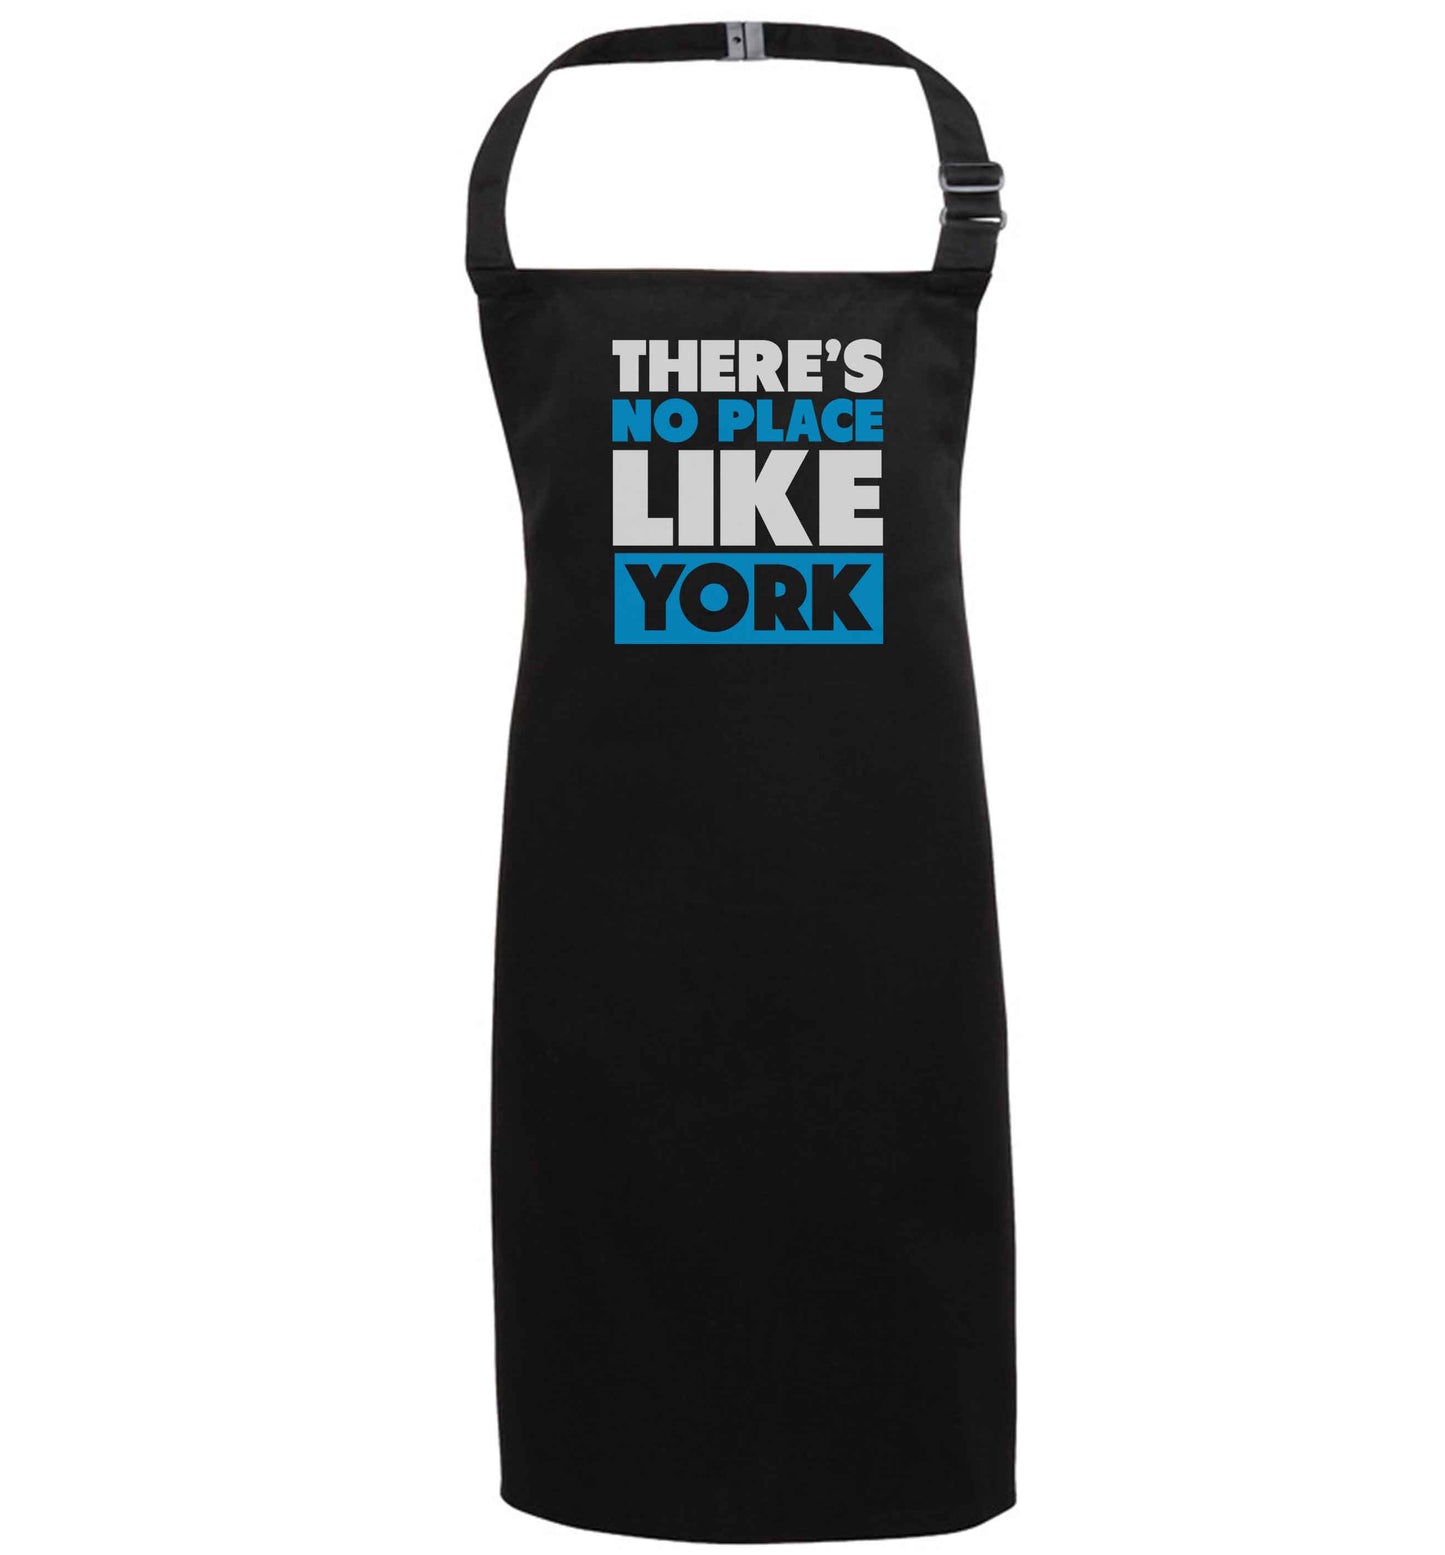 There's no place like york black apron 7-10 years